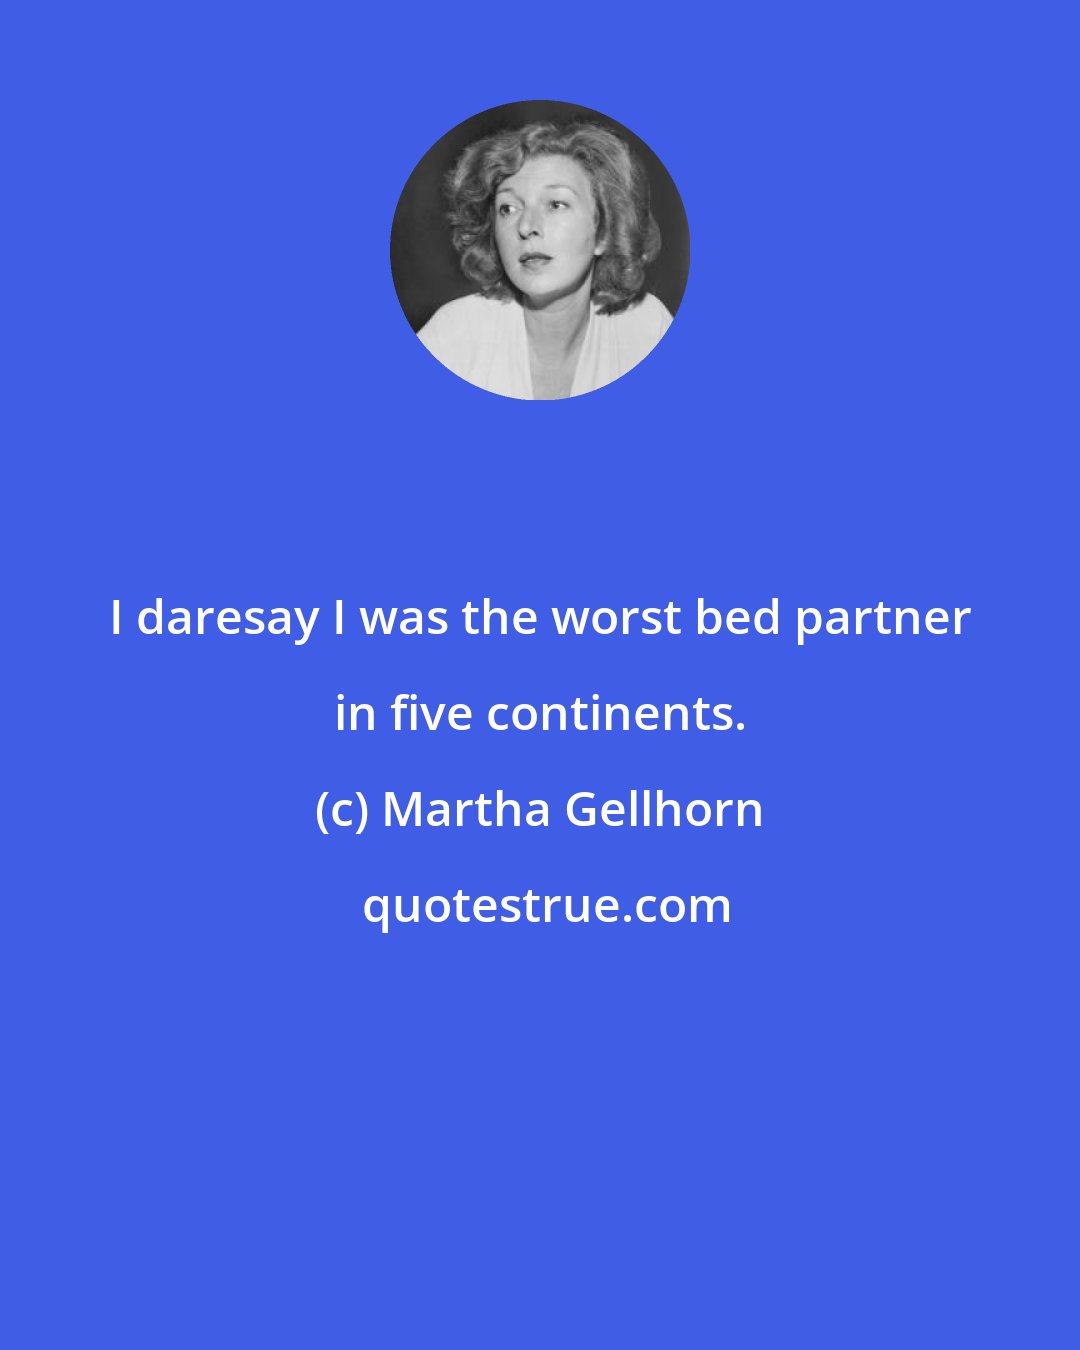 Martha Gellhorn: I daresay I was the worst bed partner in five continents.